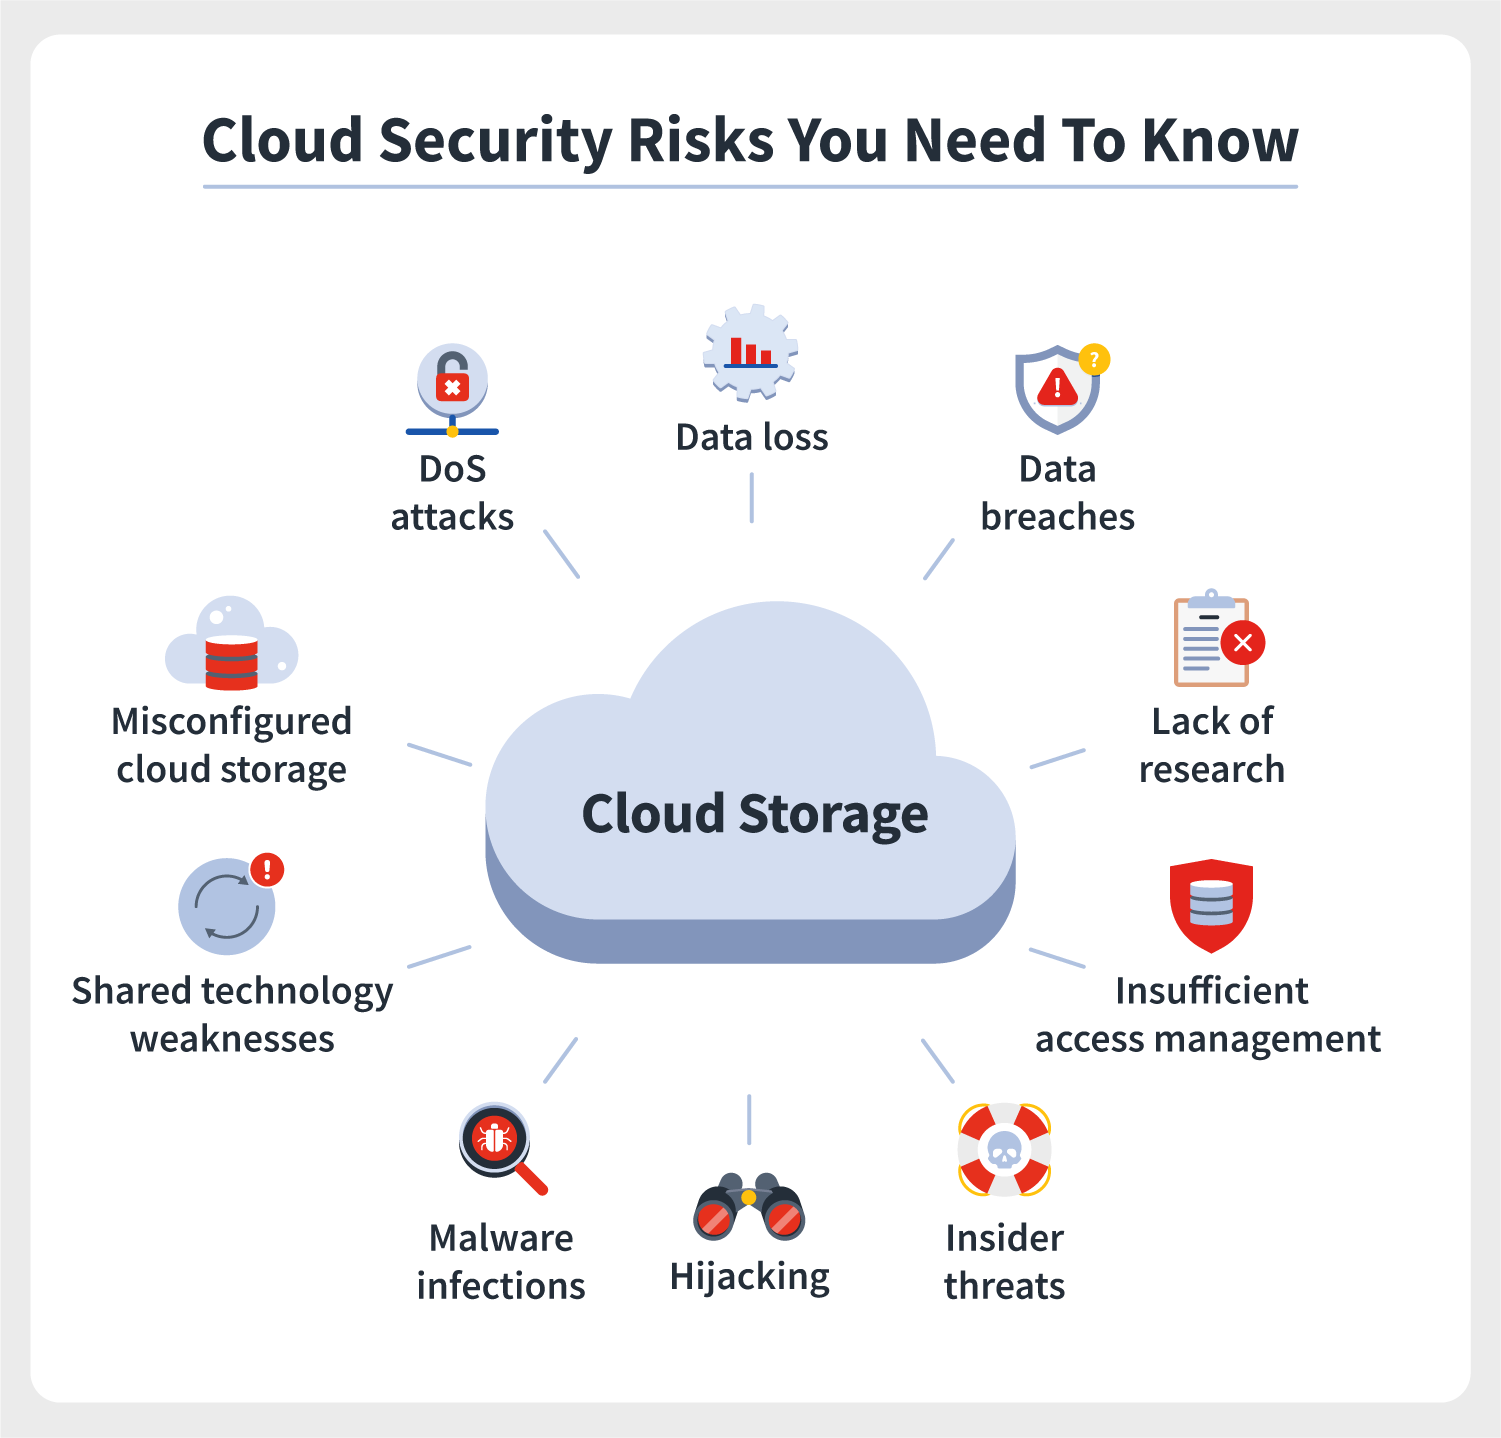 A cloud storage illustration accompanies 10 icons representing the cloud security risks people need to know.  